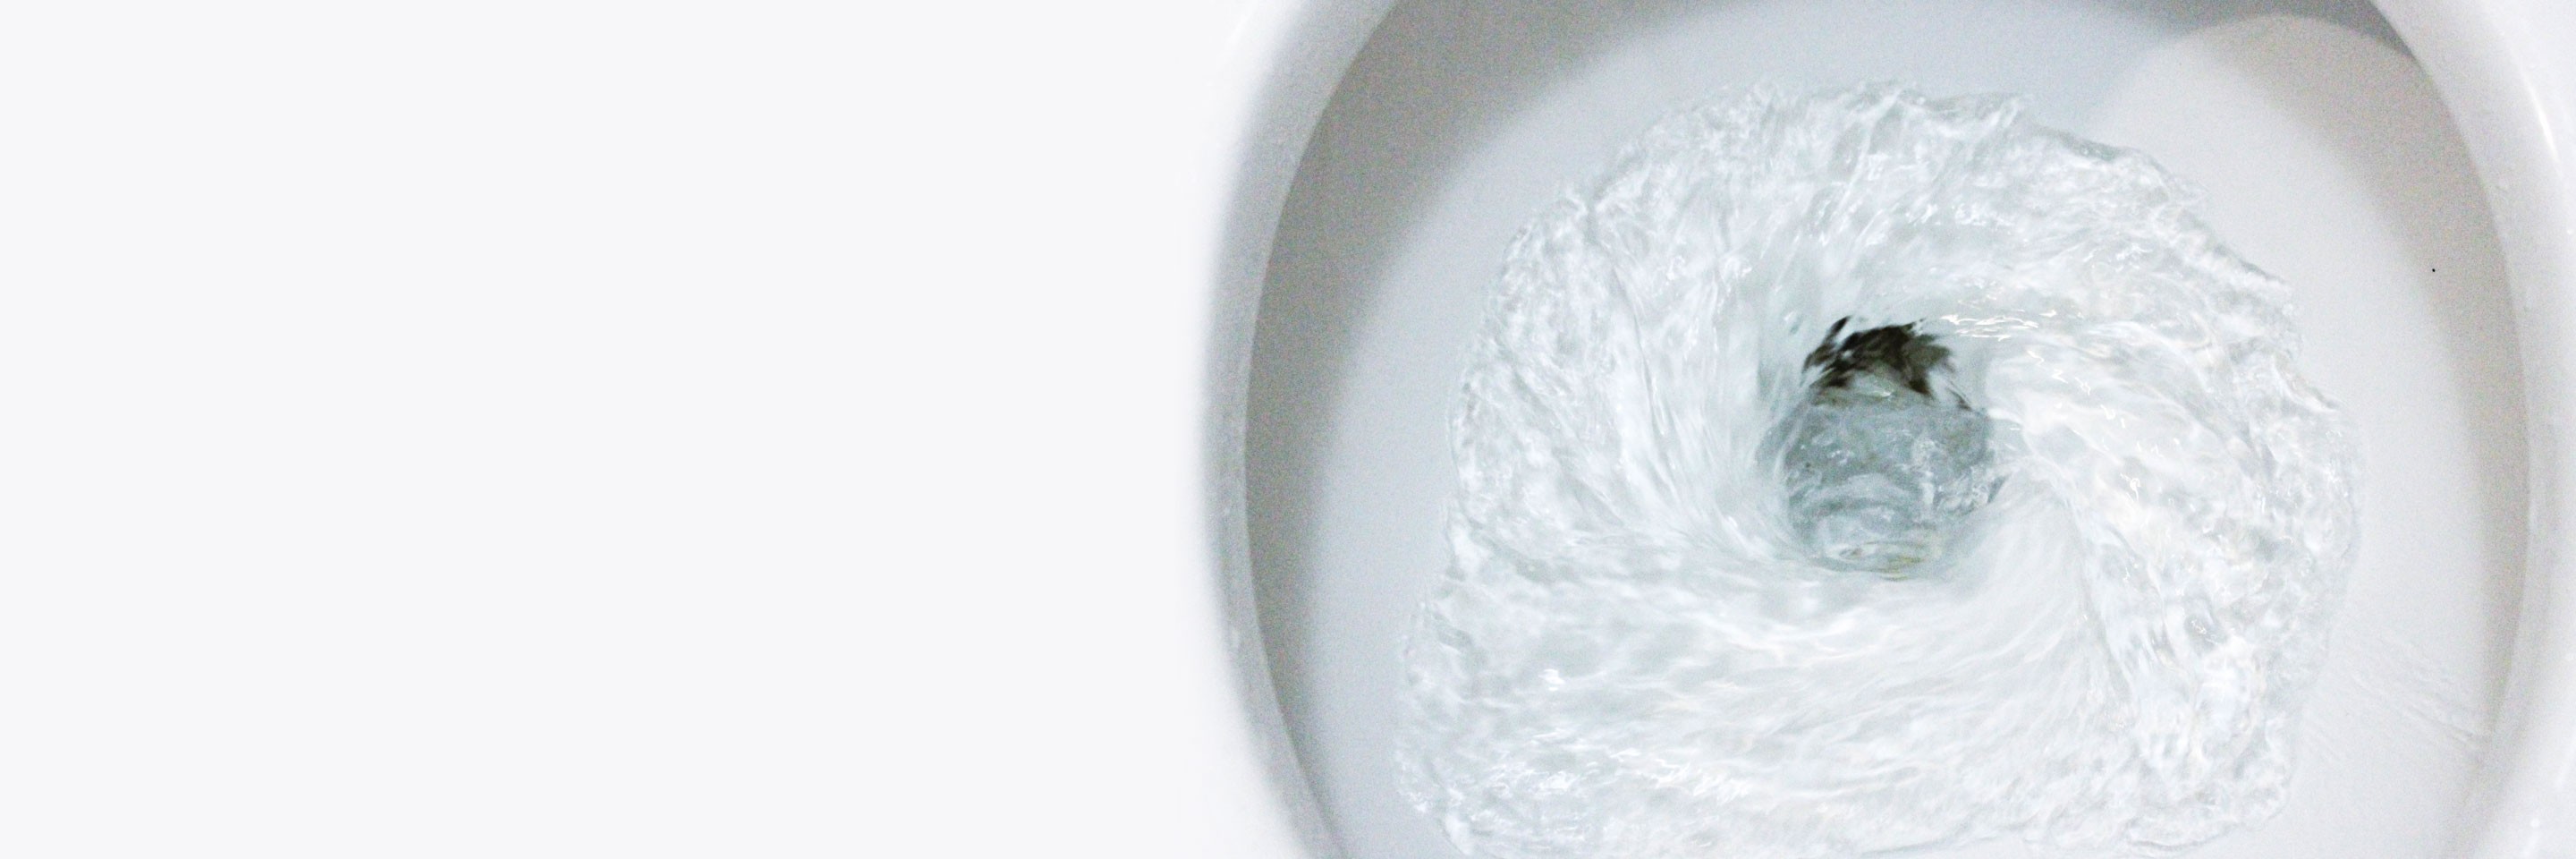 selective focus close up flushing toilet bowl for sanitary, Toilet, Flushing Water, close up, water flushing in toilet, A photo of a white ceramic toilet bowl in the process of washing it off. Ceramic sanitary ware for correcting the need with an automatic flushing device